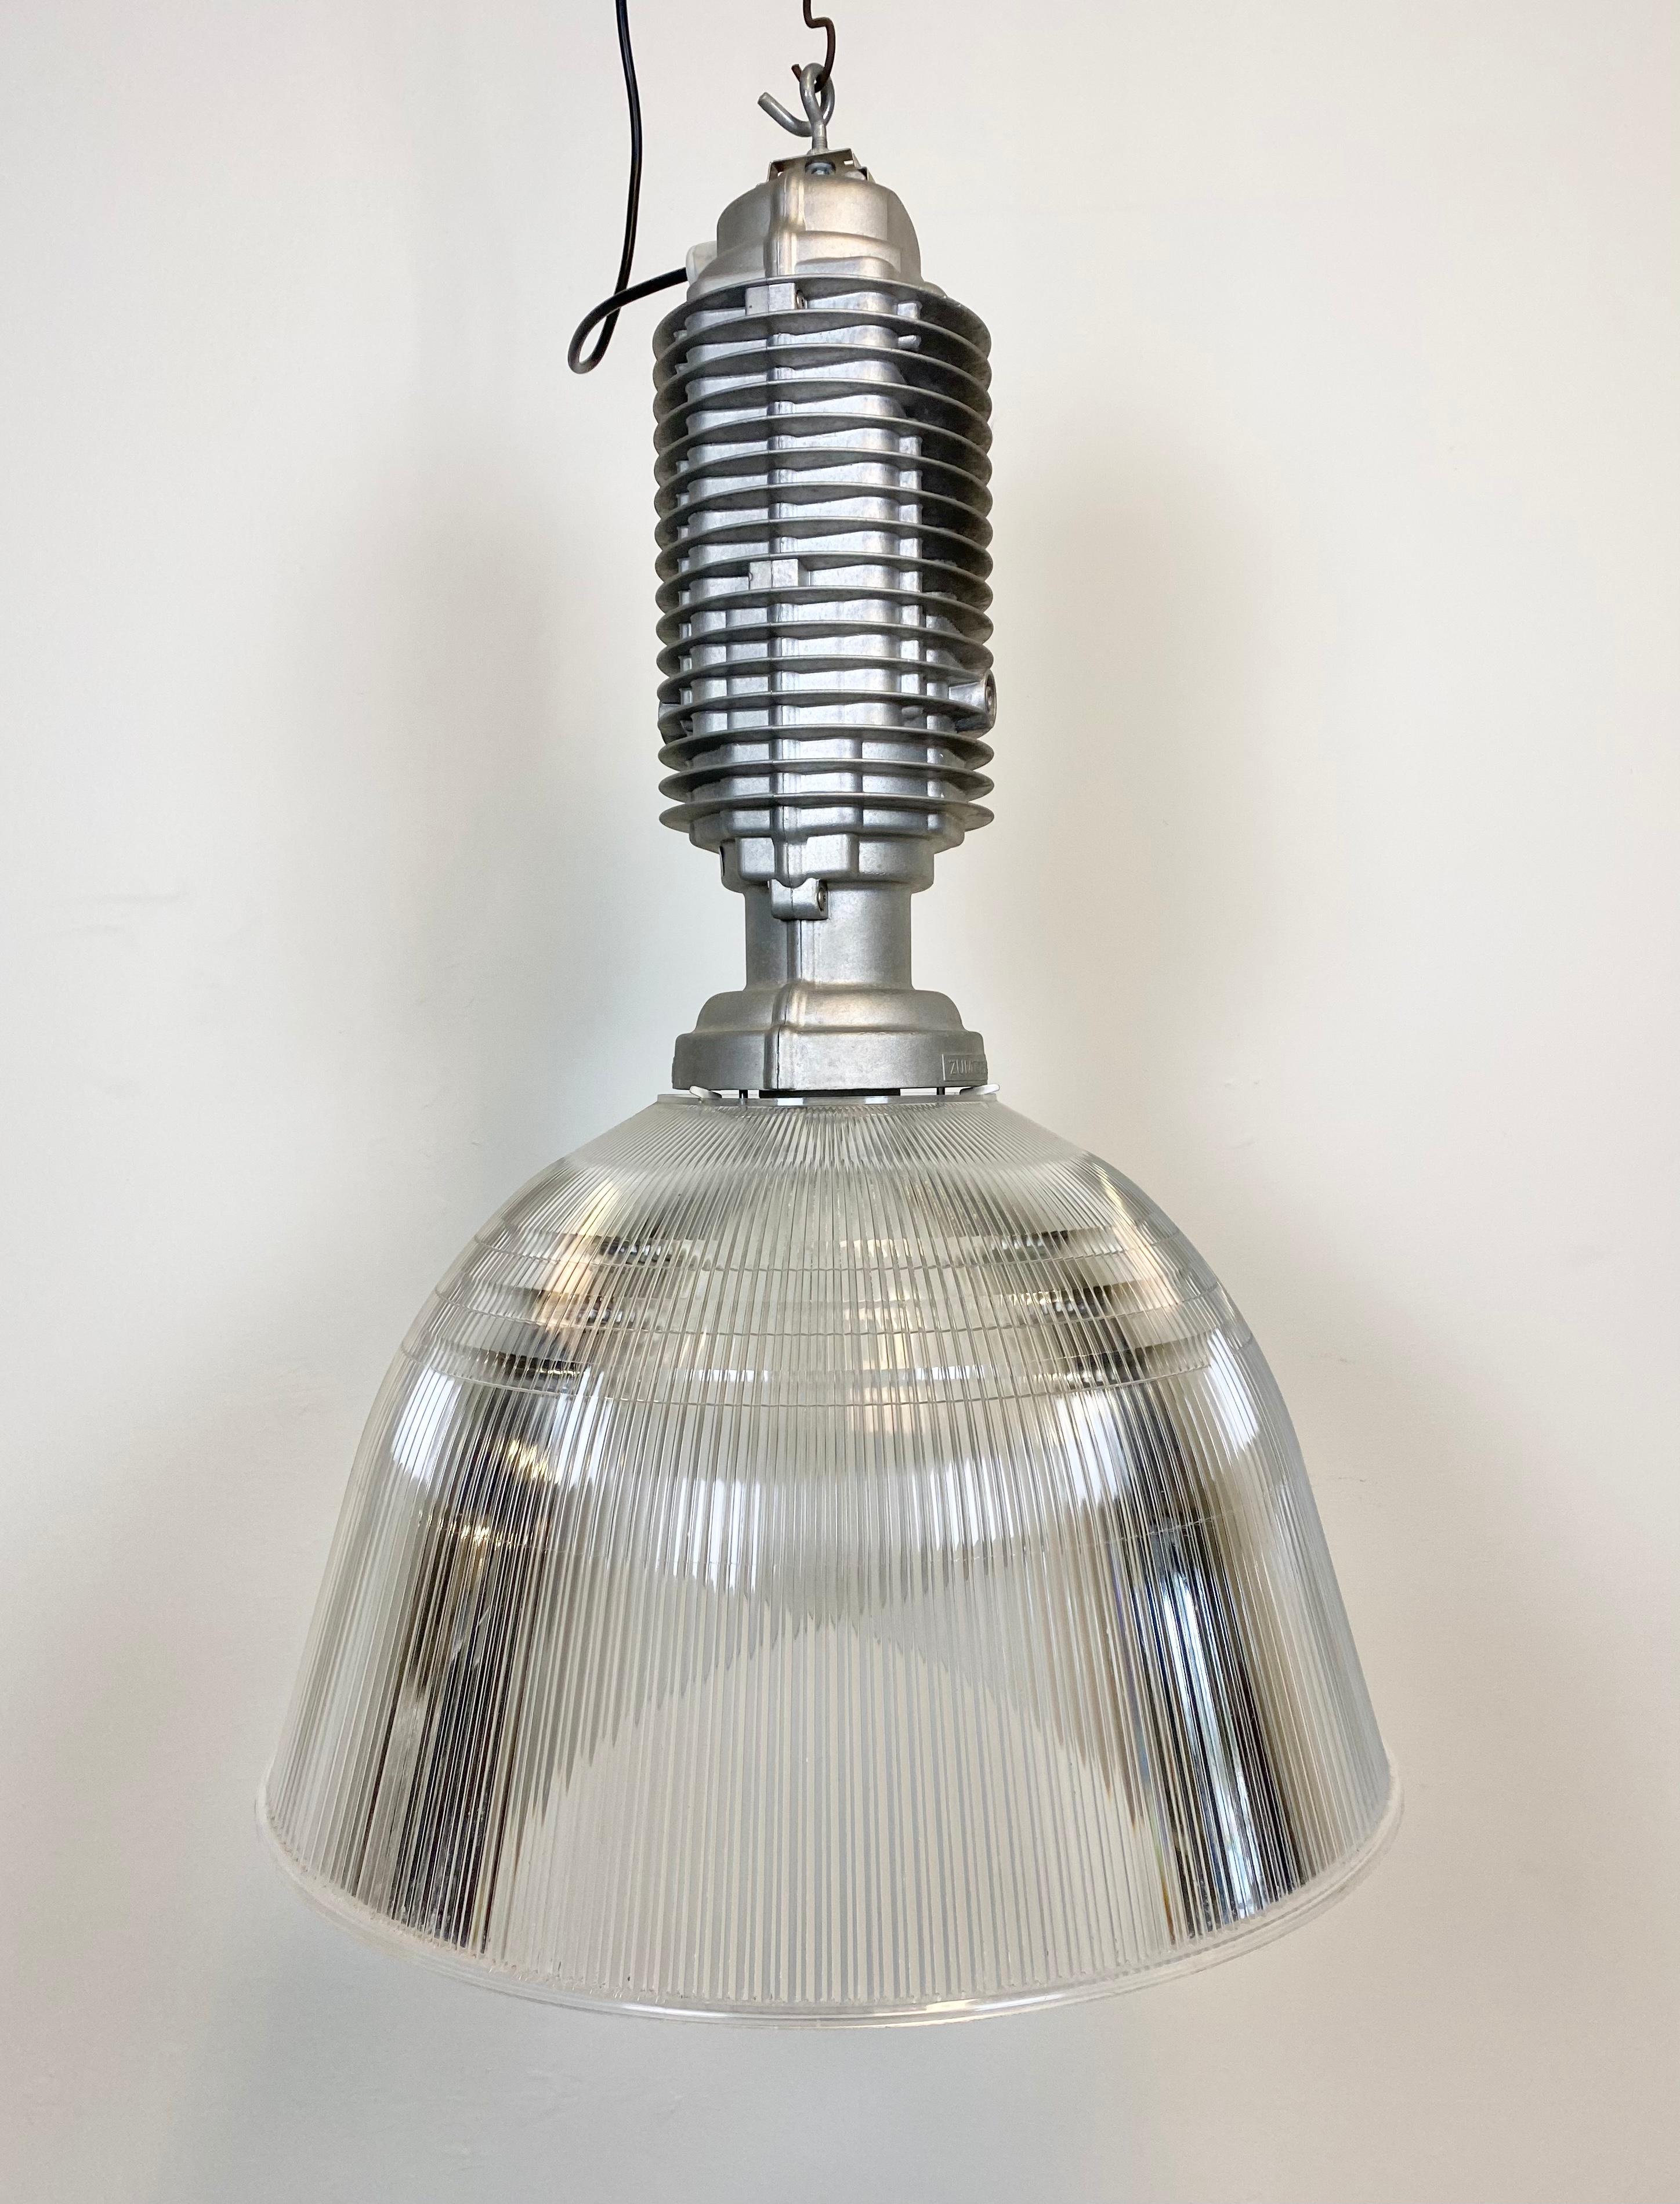 This Industrial pendant lamp was designed by Charles Keller for Zumtobel Staff during the 1990s. It features a cast aluminum top and a transparent plastic shade. New porcelain socket for E27 lightbulbs and new wire. The diameter of the shade is 55